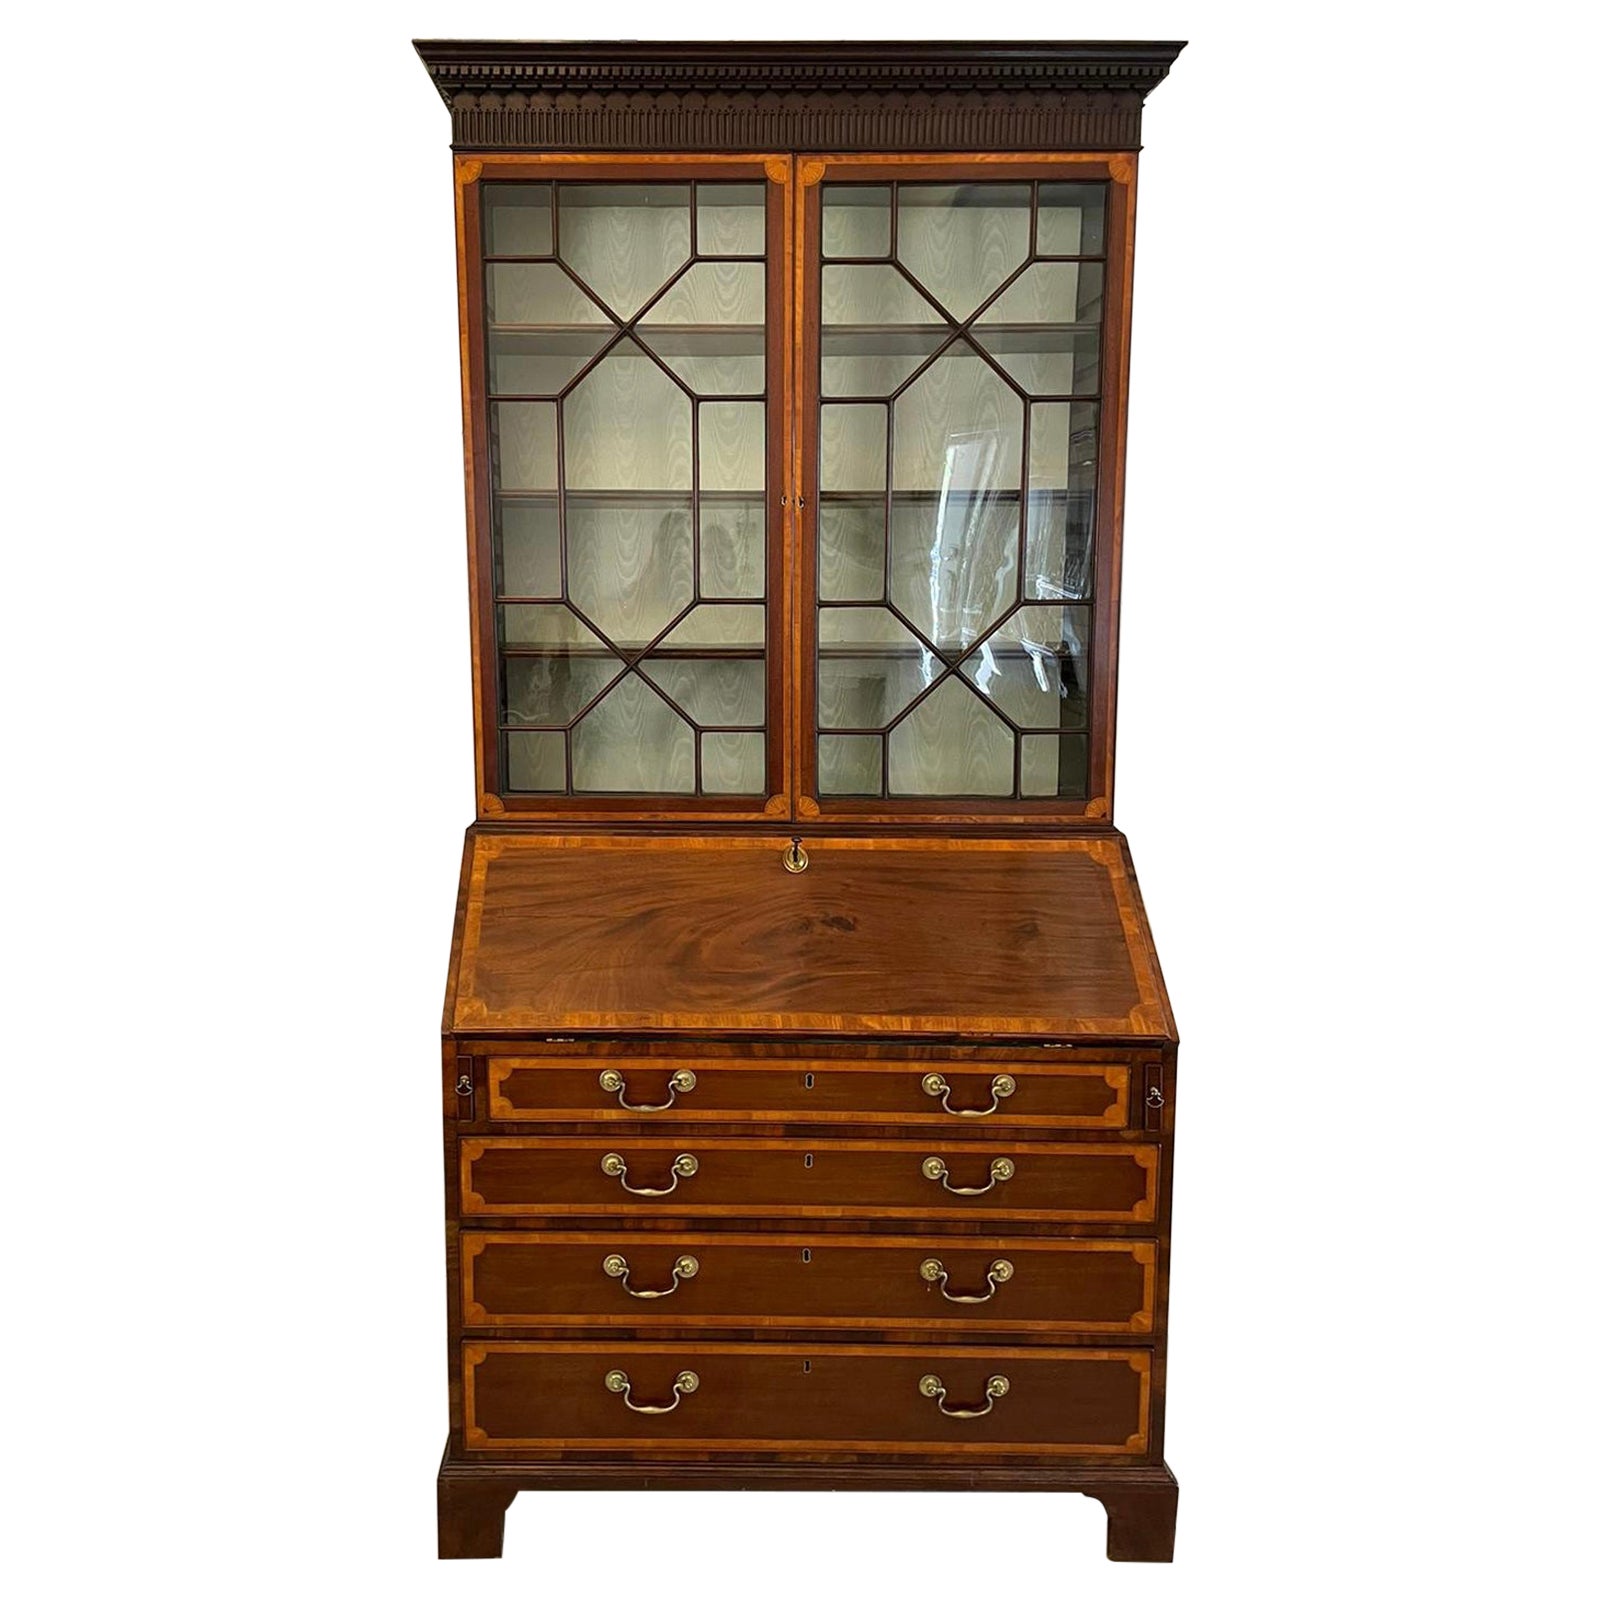 Outstanding Quality Antique George III Mahogany Inlaid Bureau Bookcase For Sale